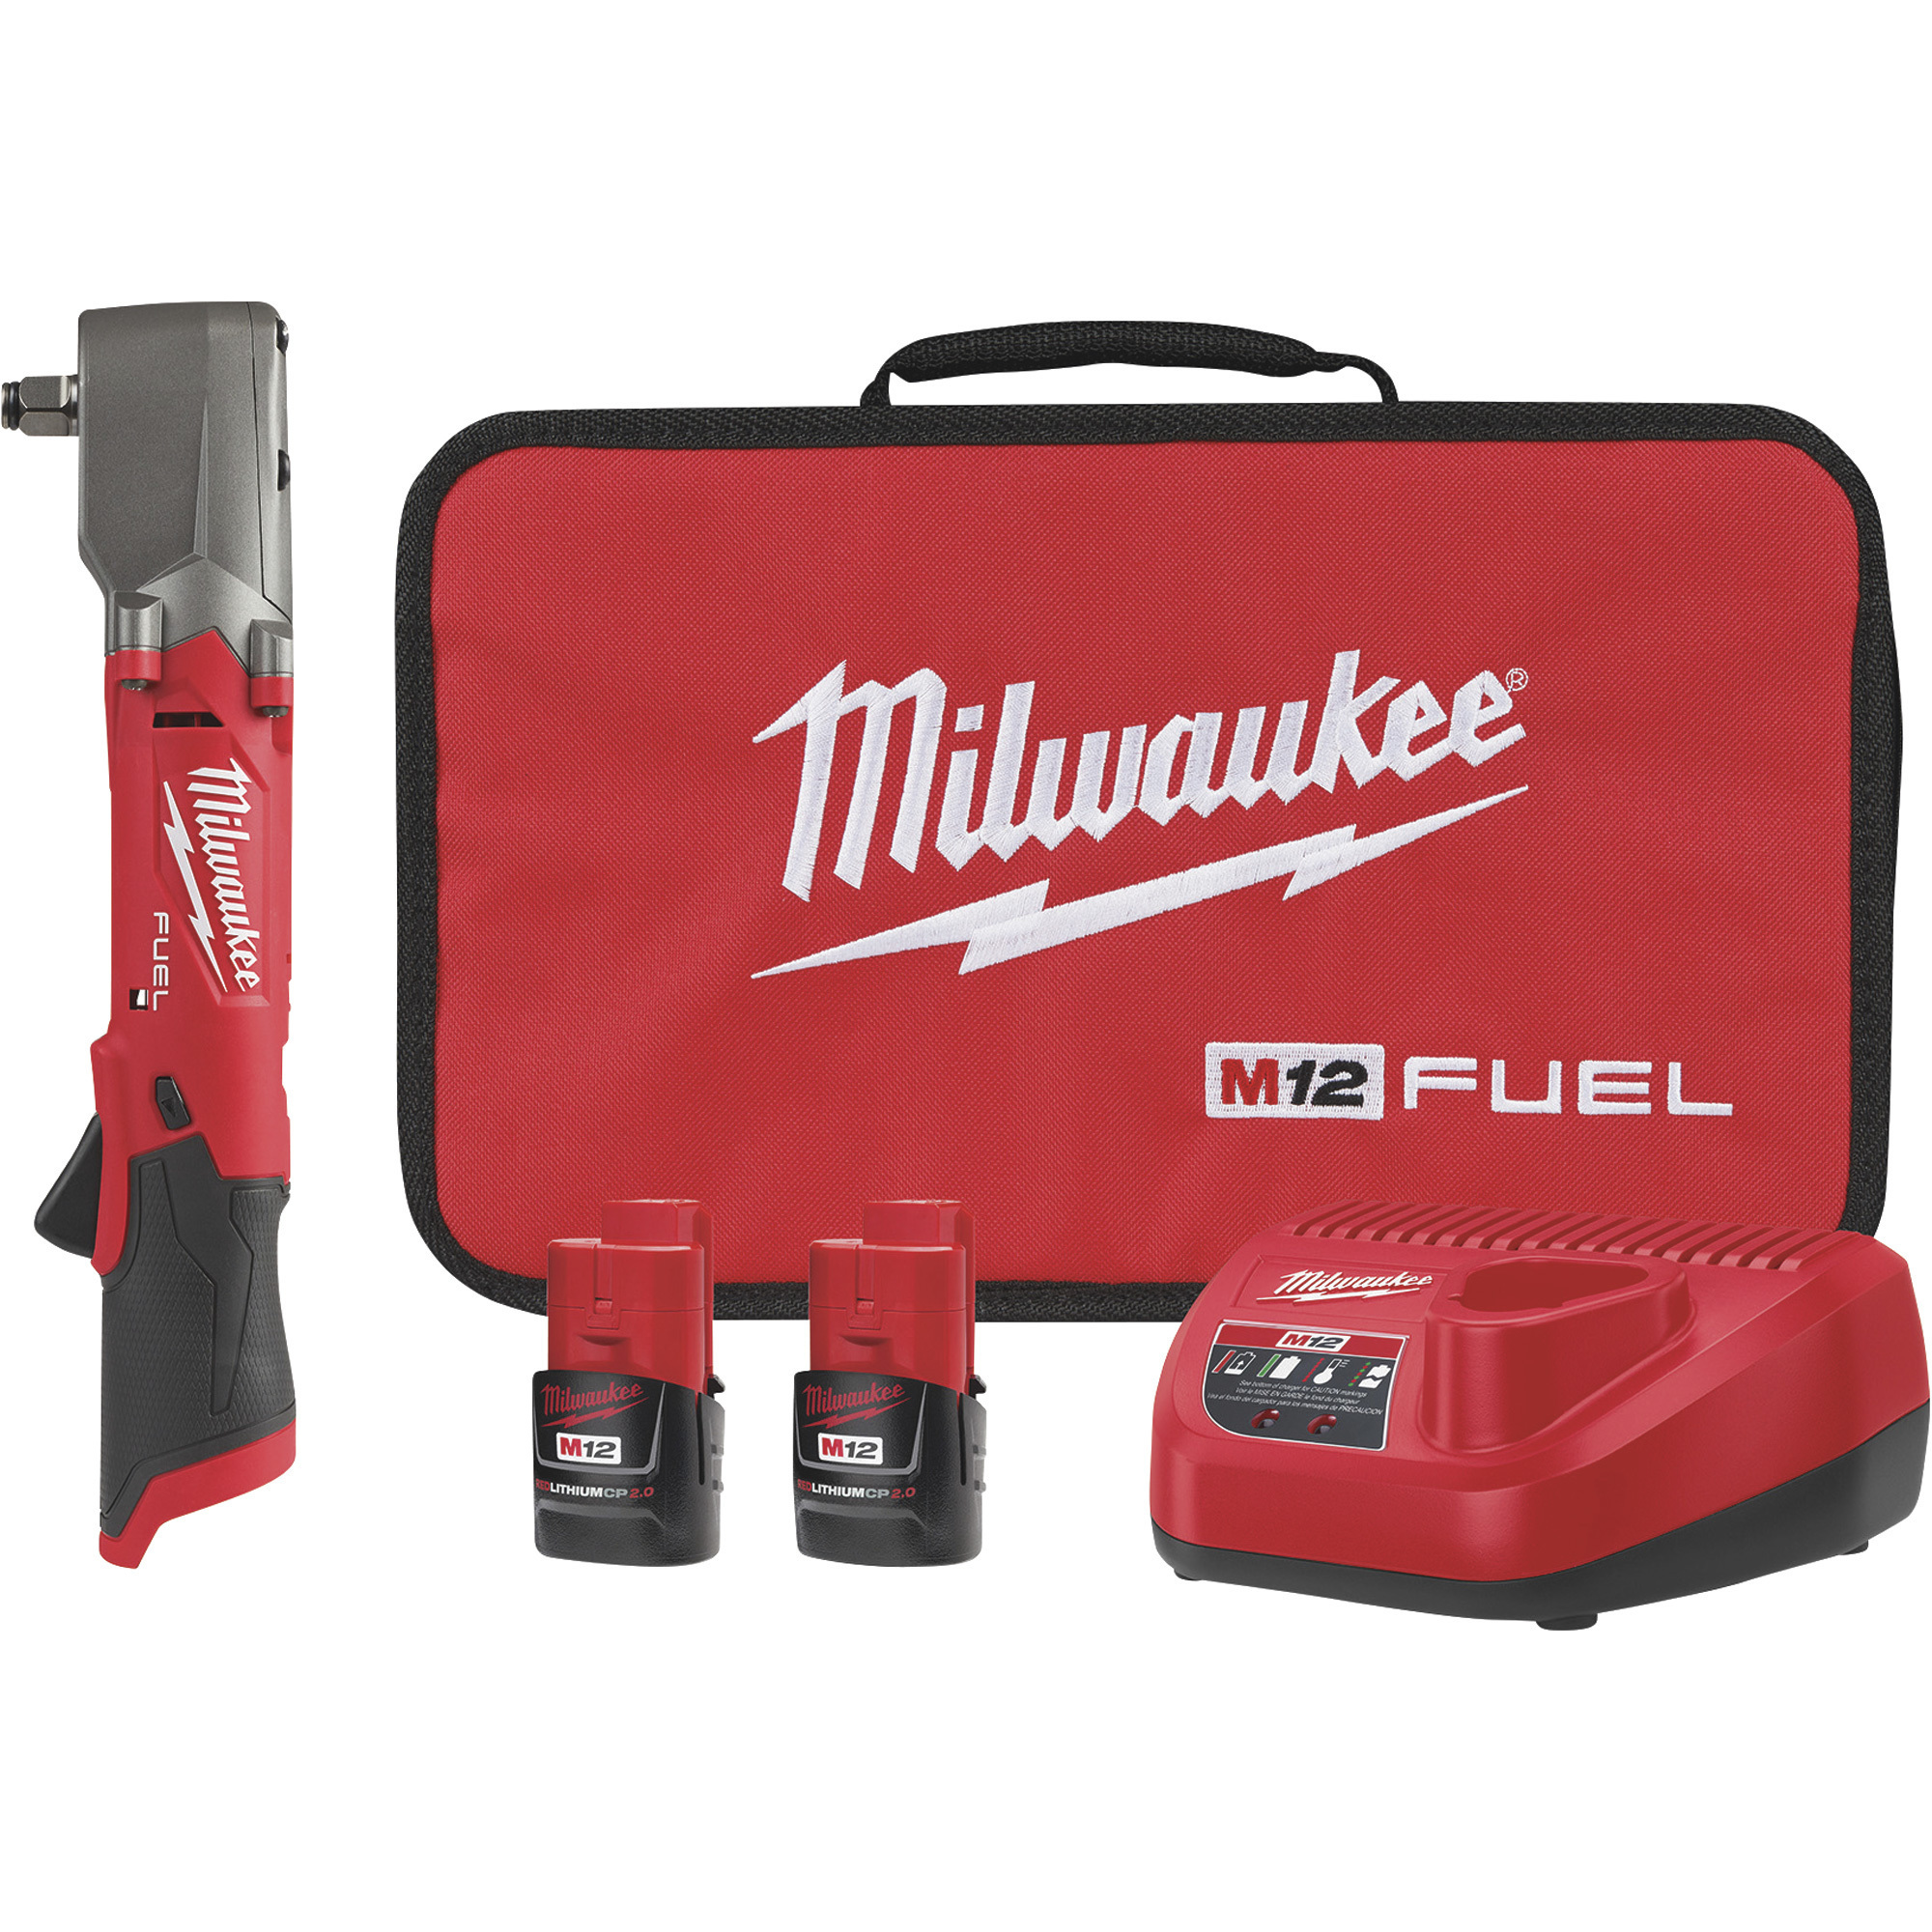 M12 FUEL Right Angle 1/2in. Impact Wrench with Friction Ring Kit, 220 Ft./Lbs. Torque, 2 Batteries, Model - Milwaukee 2565-22